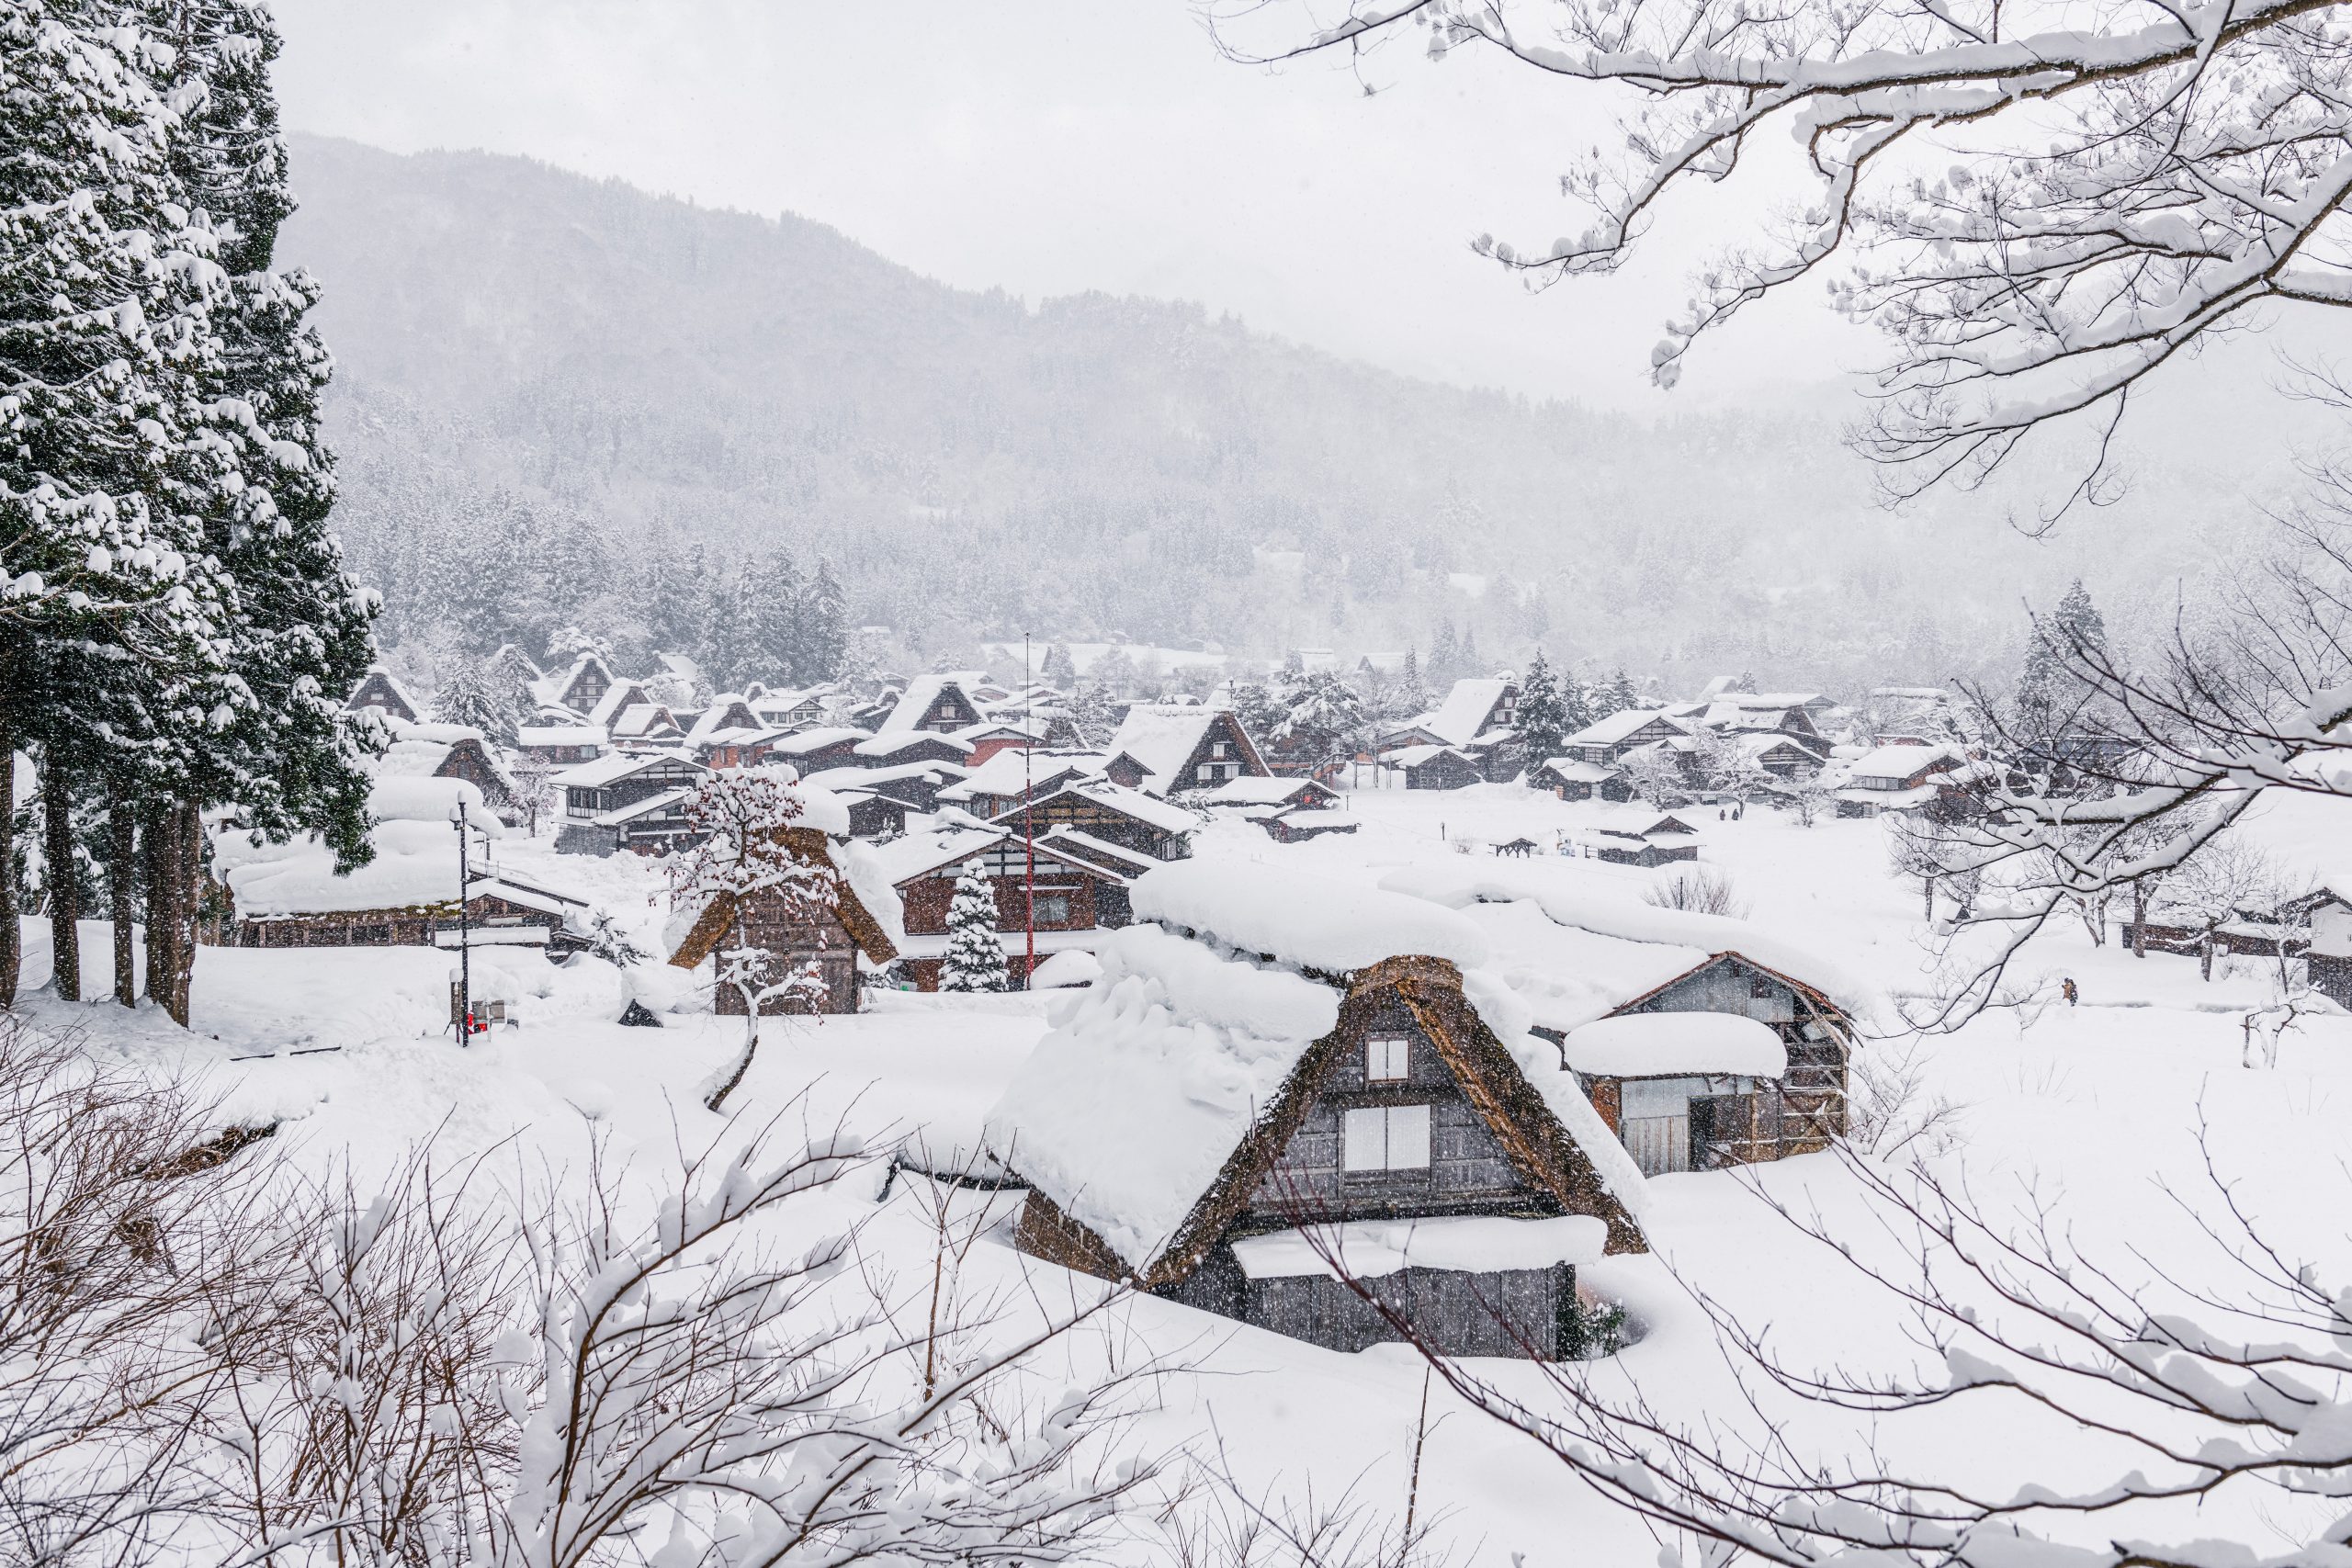 Gifu Village A-Frame Houses in the snow (Unsplash)